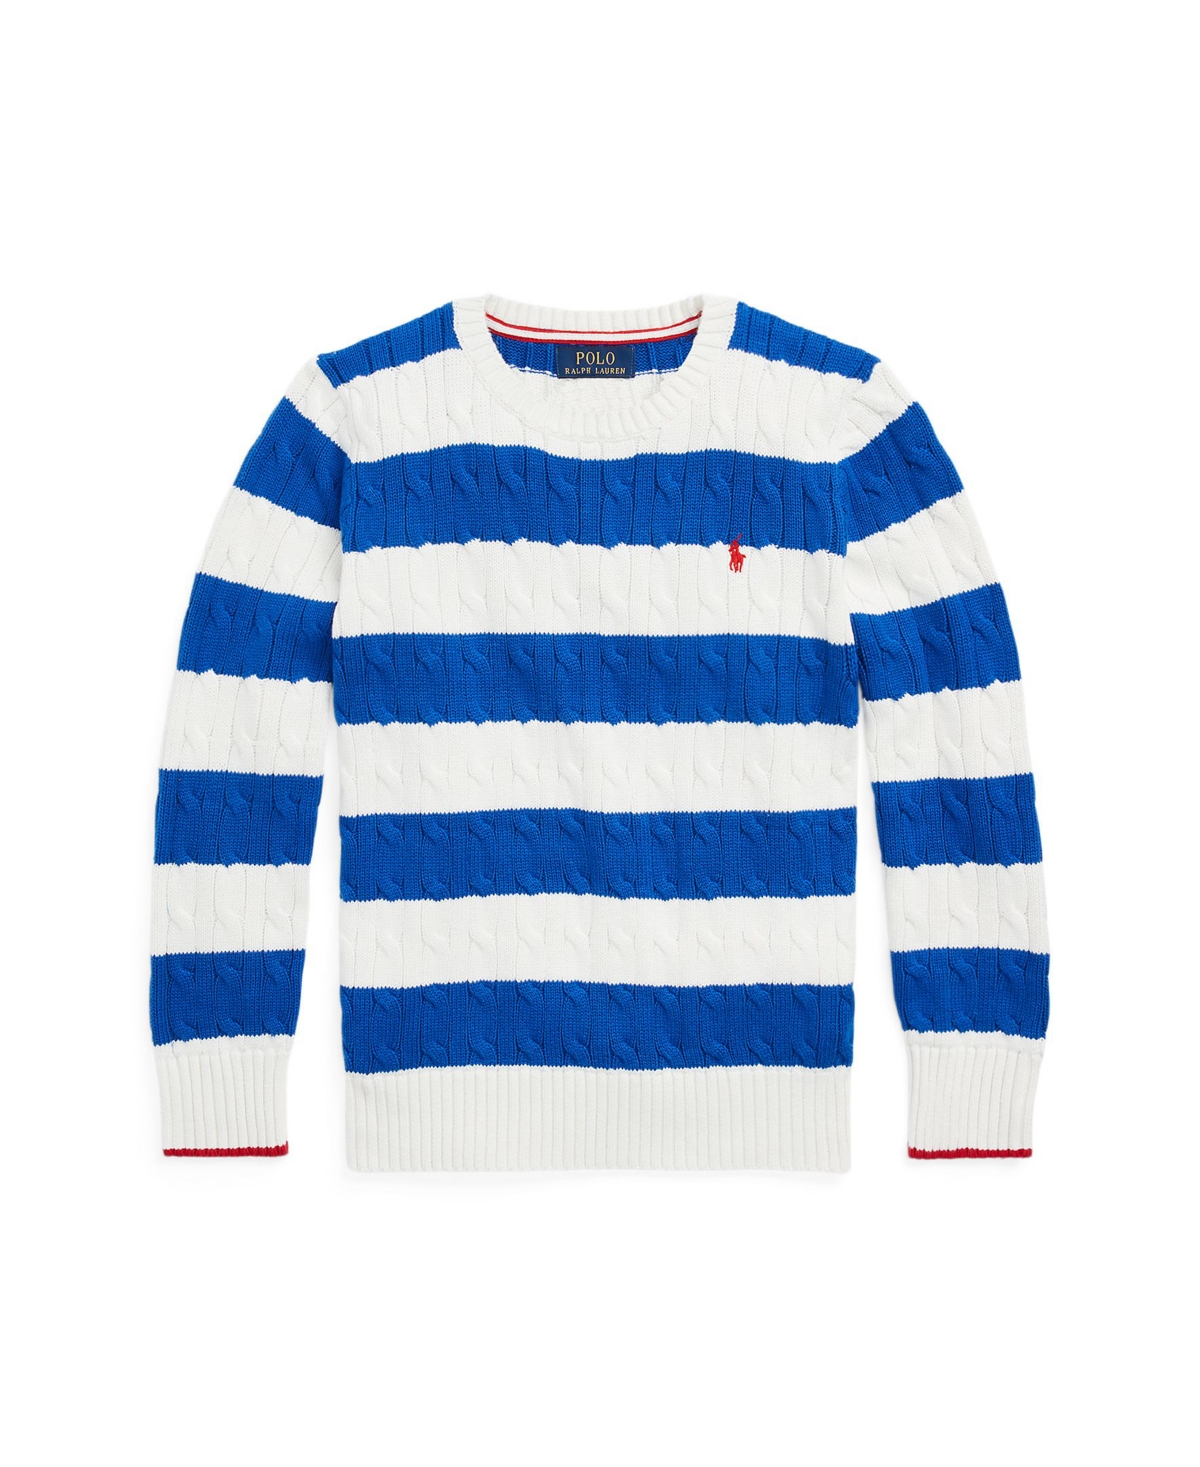 POLO RALPH LAUREN BIG BOYS STRIPED CABLE-KNIT COTTON SWEATER